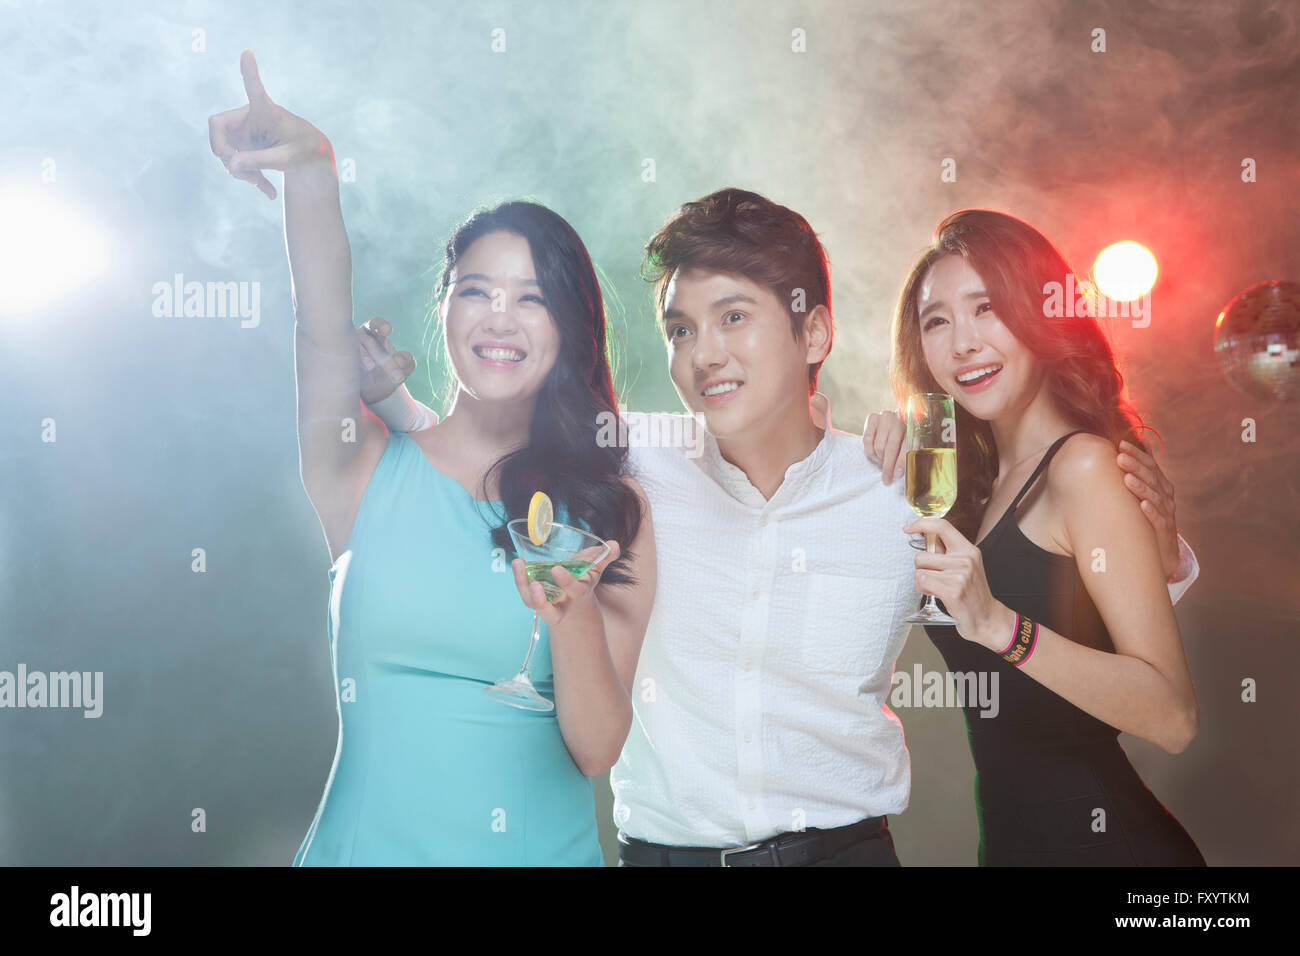 Portrait of three young smiling people posing with drinks looking up at nightclub Stock Photo